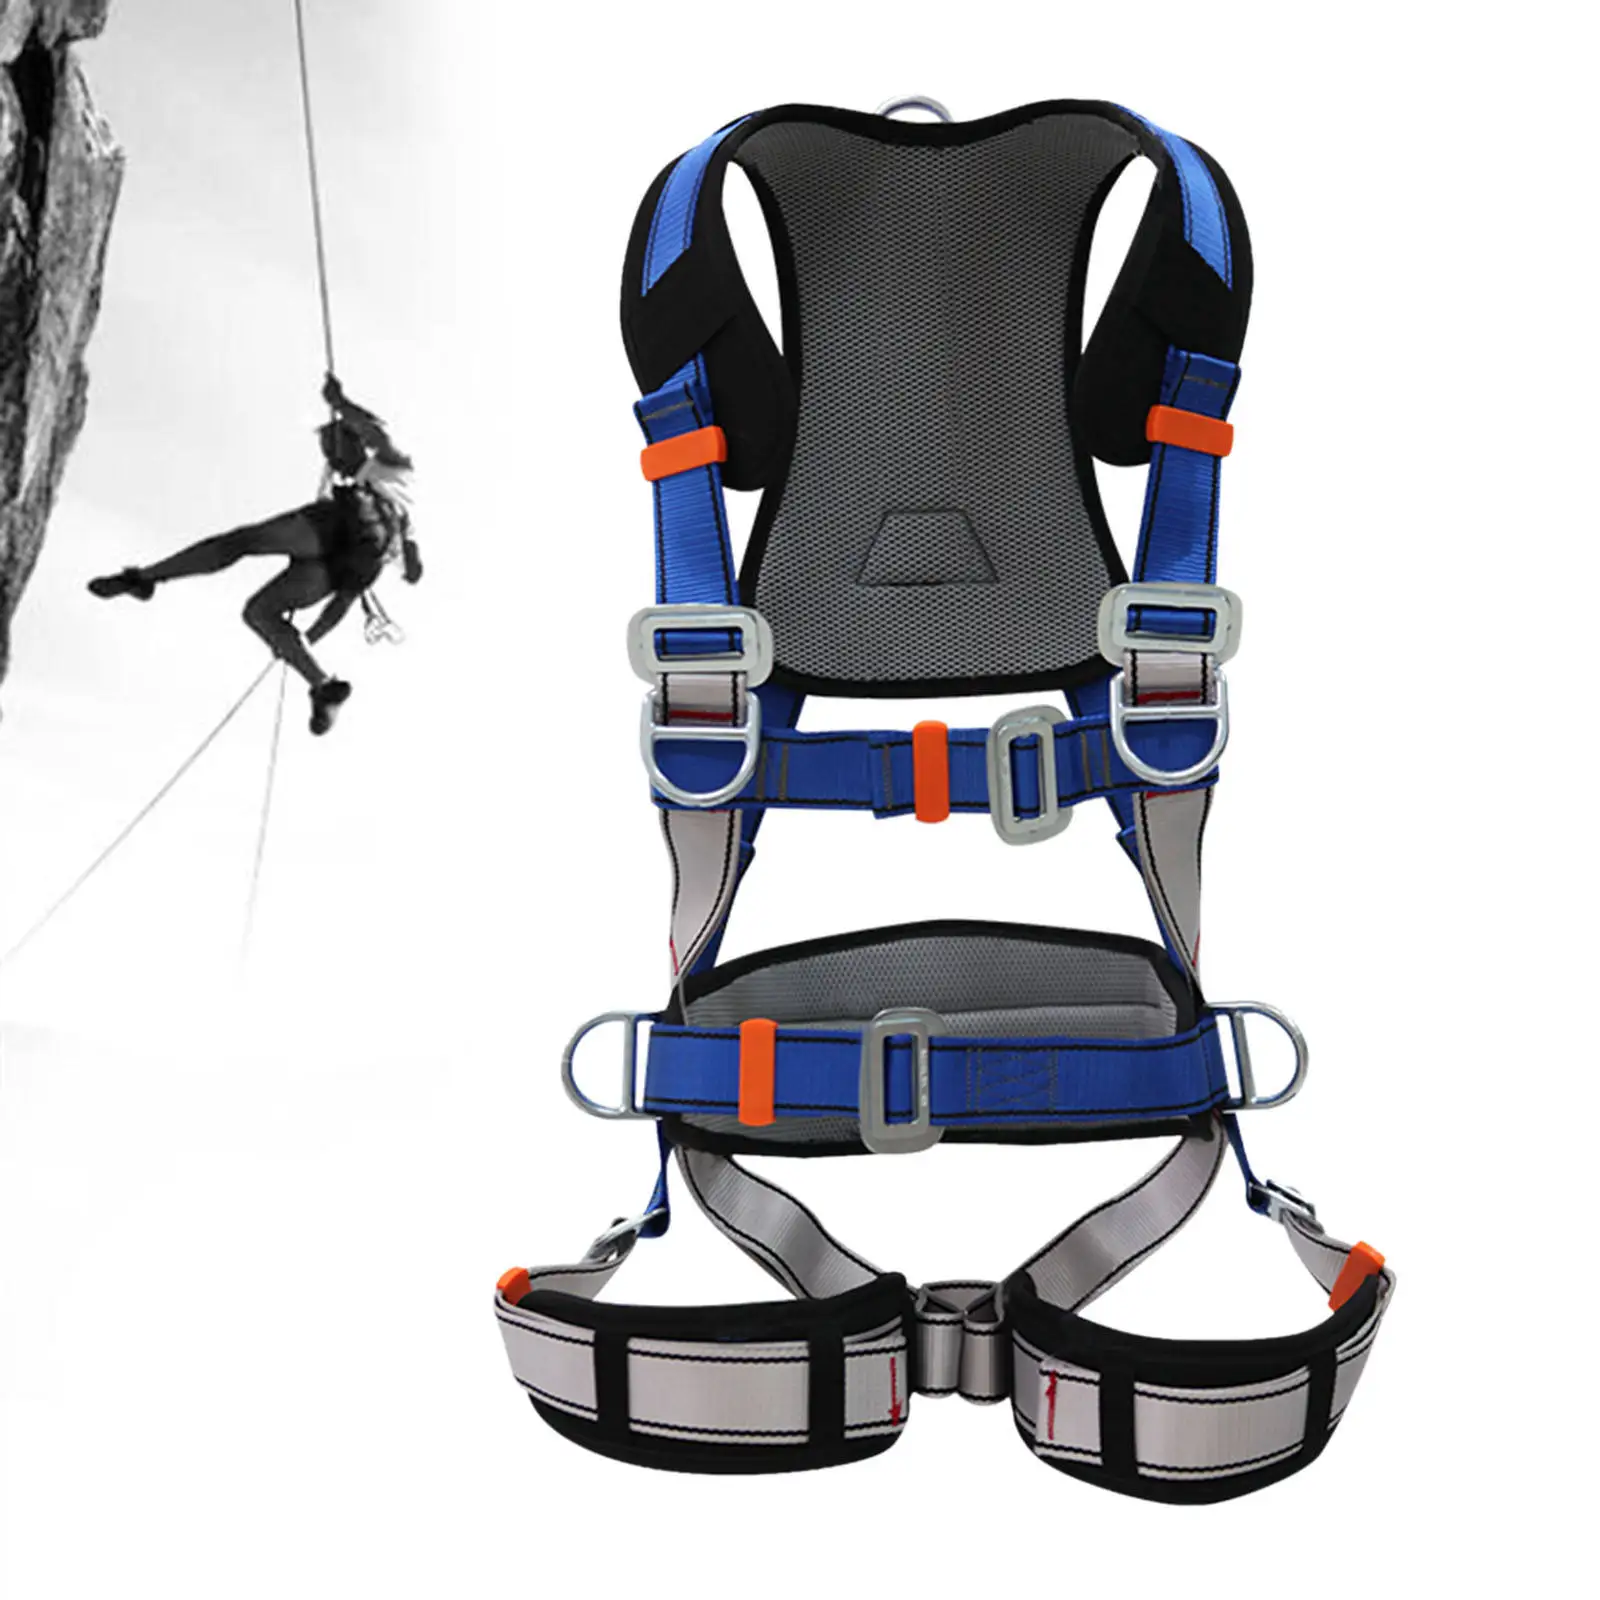 Climbing Harness Full Body Safety Belt Tree Rock Climbing for Rappelling Mountaineering Fire Rescuing Accessories Gear